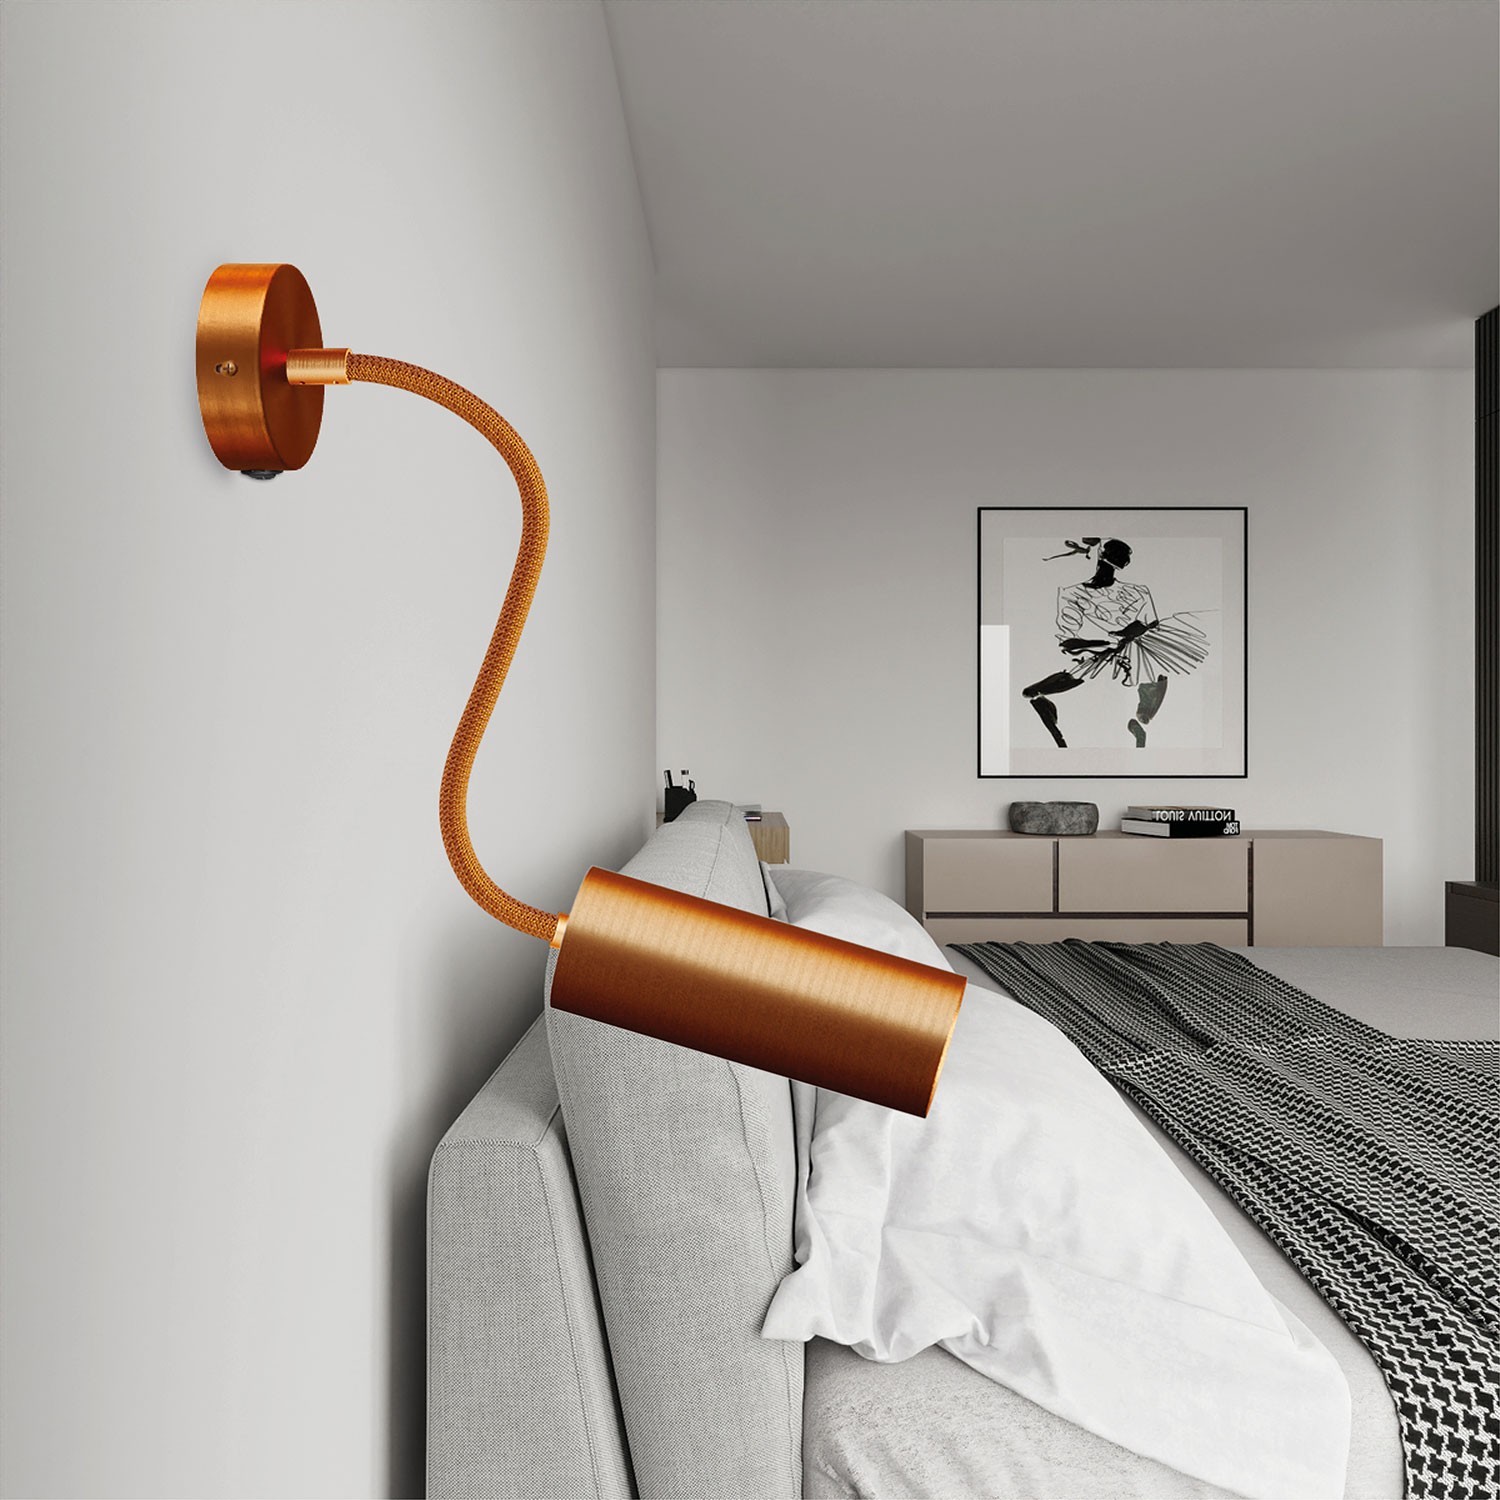 Fermaluce Flex 30 Lamp with mini rose, switch and spotlight with Tub-E14 lampshade